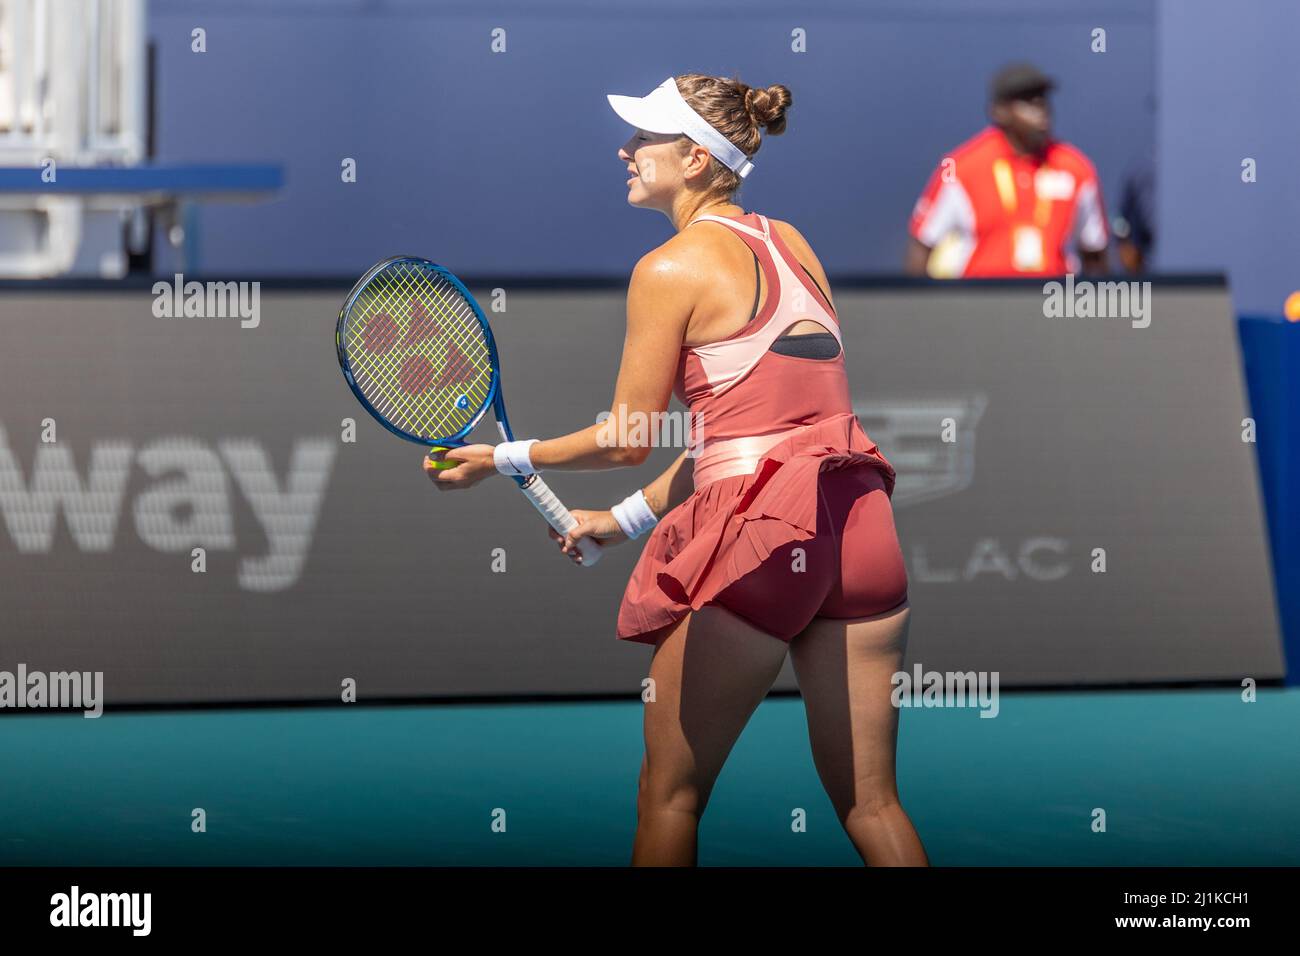 Miami Gardens, FL, USA. 26th March 2022. B. Bencic (SUI) vs H. Watson (GBR)  during the world tennis tournament at the 2022 Miami Open powered by Itau.  Score: 6-4, 6-1. Winner: B.